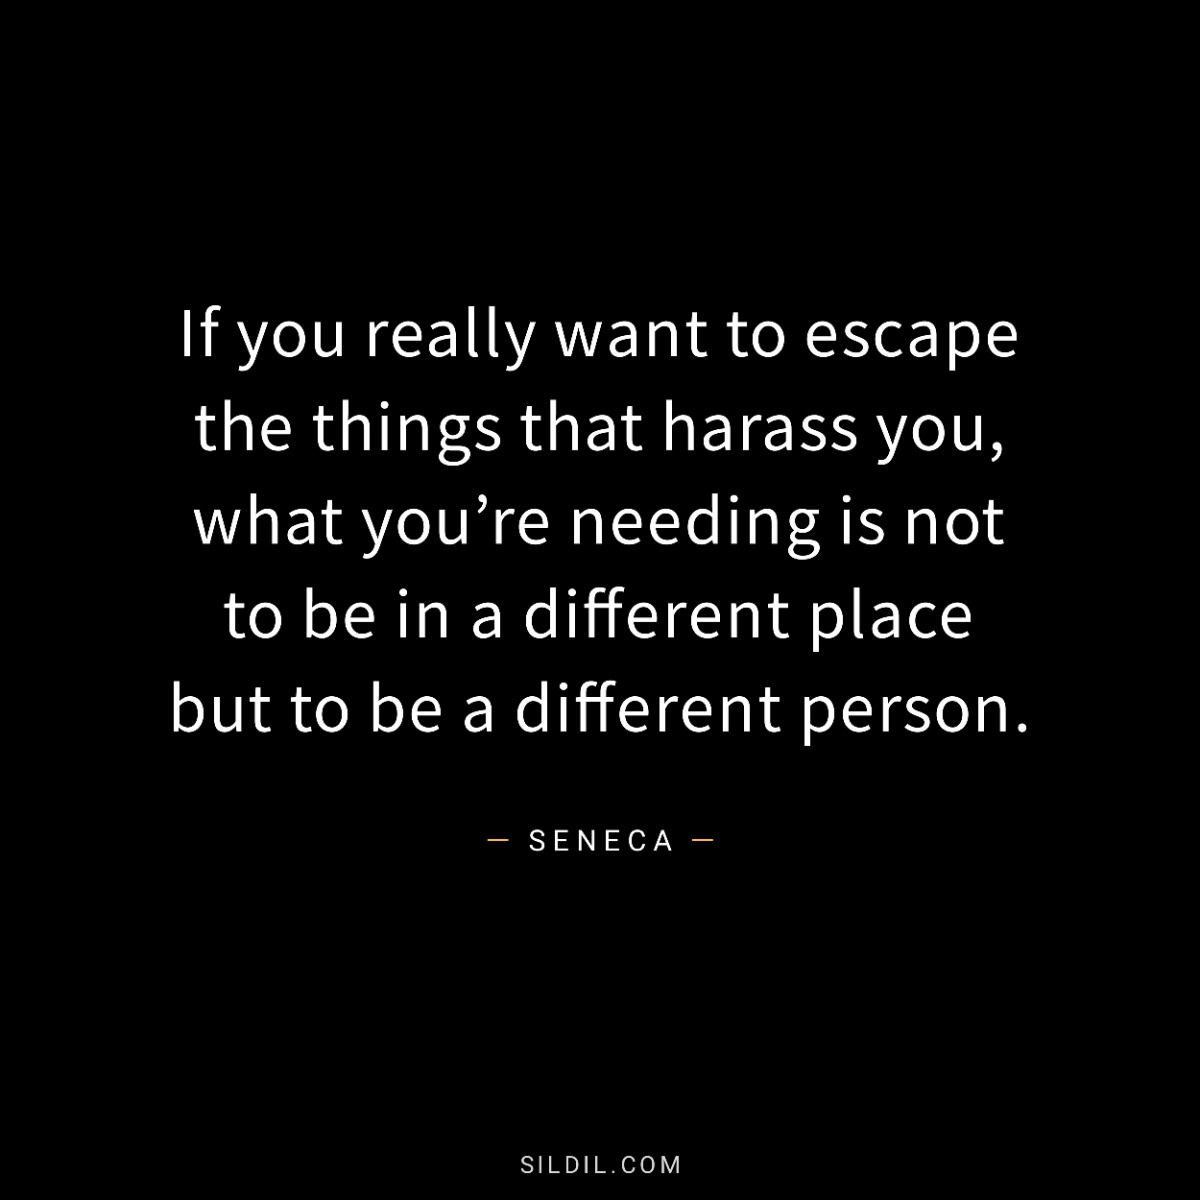 If you really want to escape the things that harass you, what you’re needing is not to be in a different place but to be a different person.